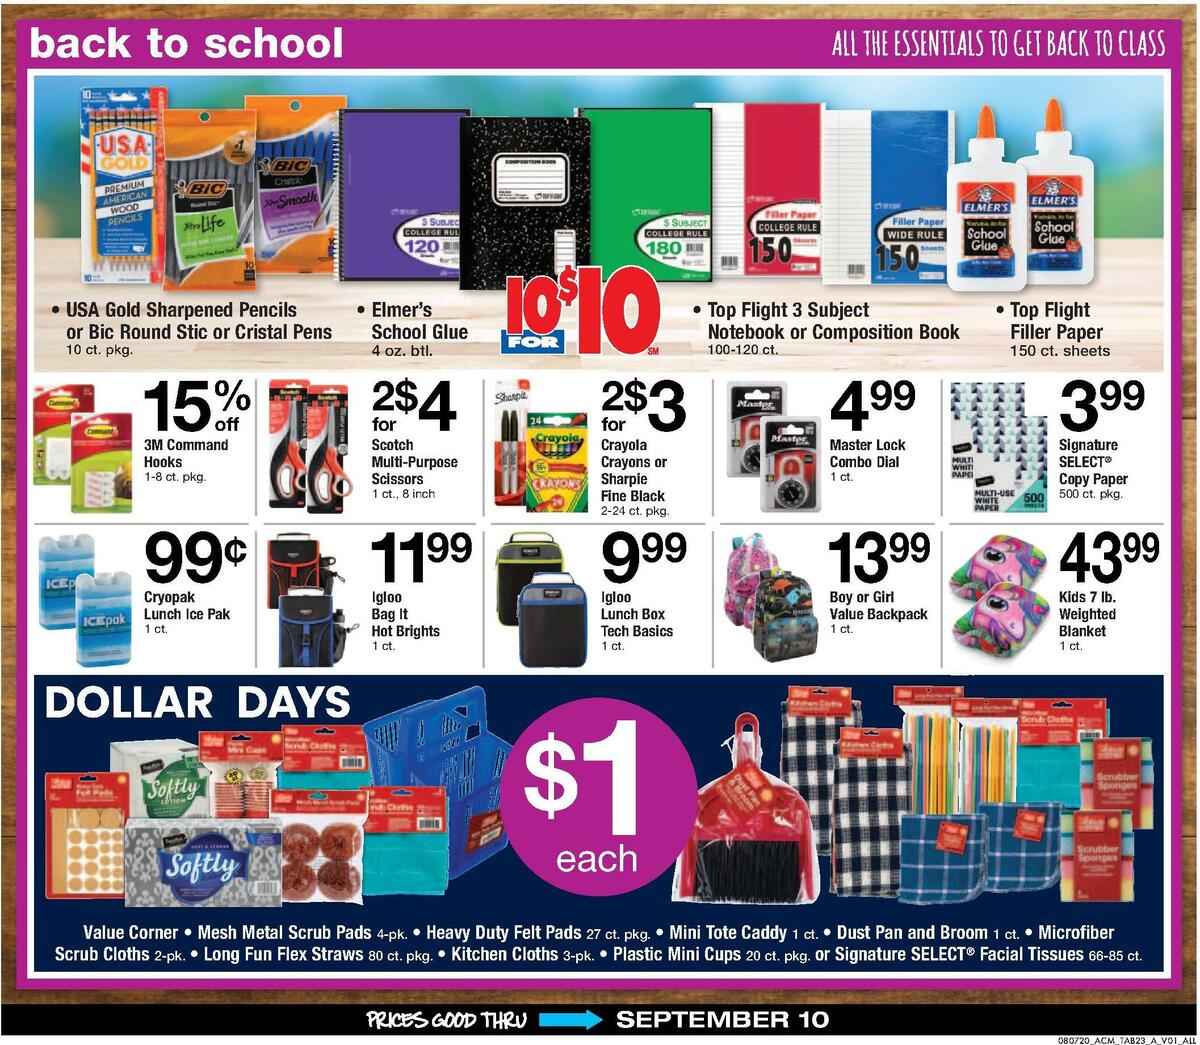 ACME Markets Big Book Weekly Ad from August 7